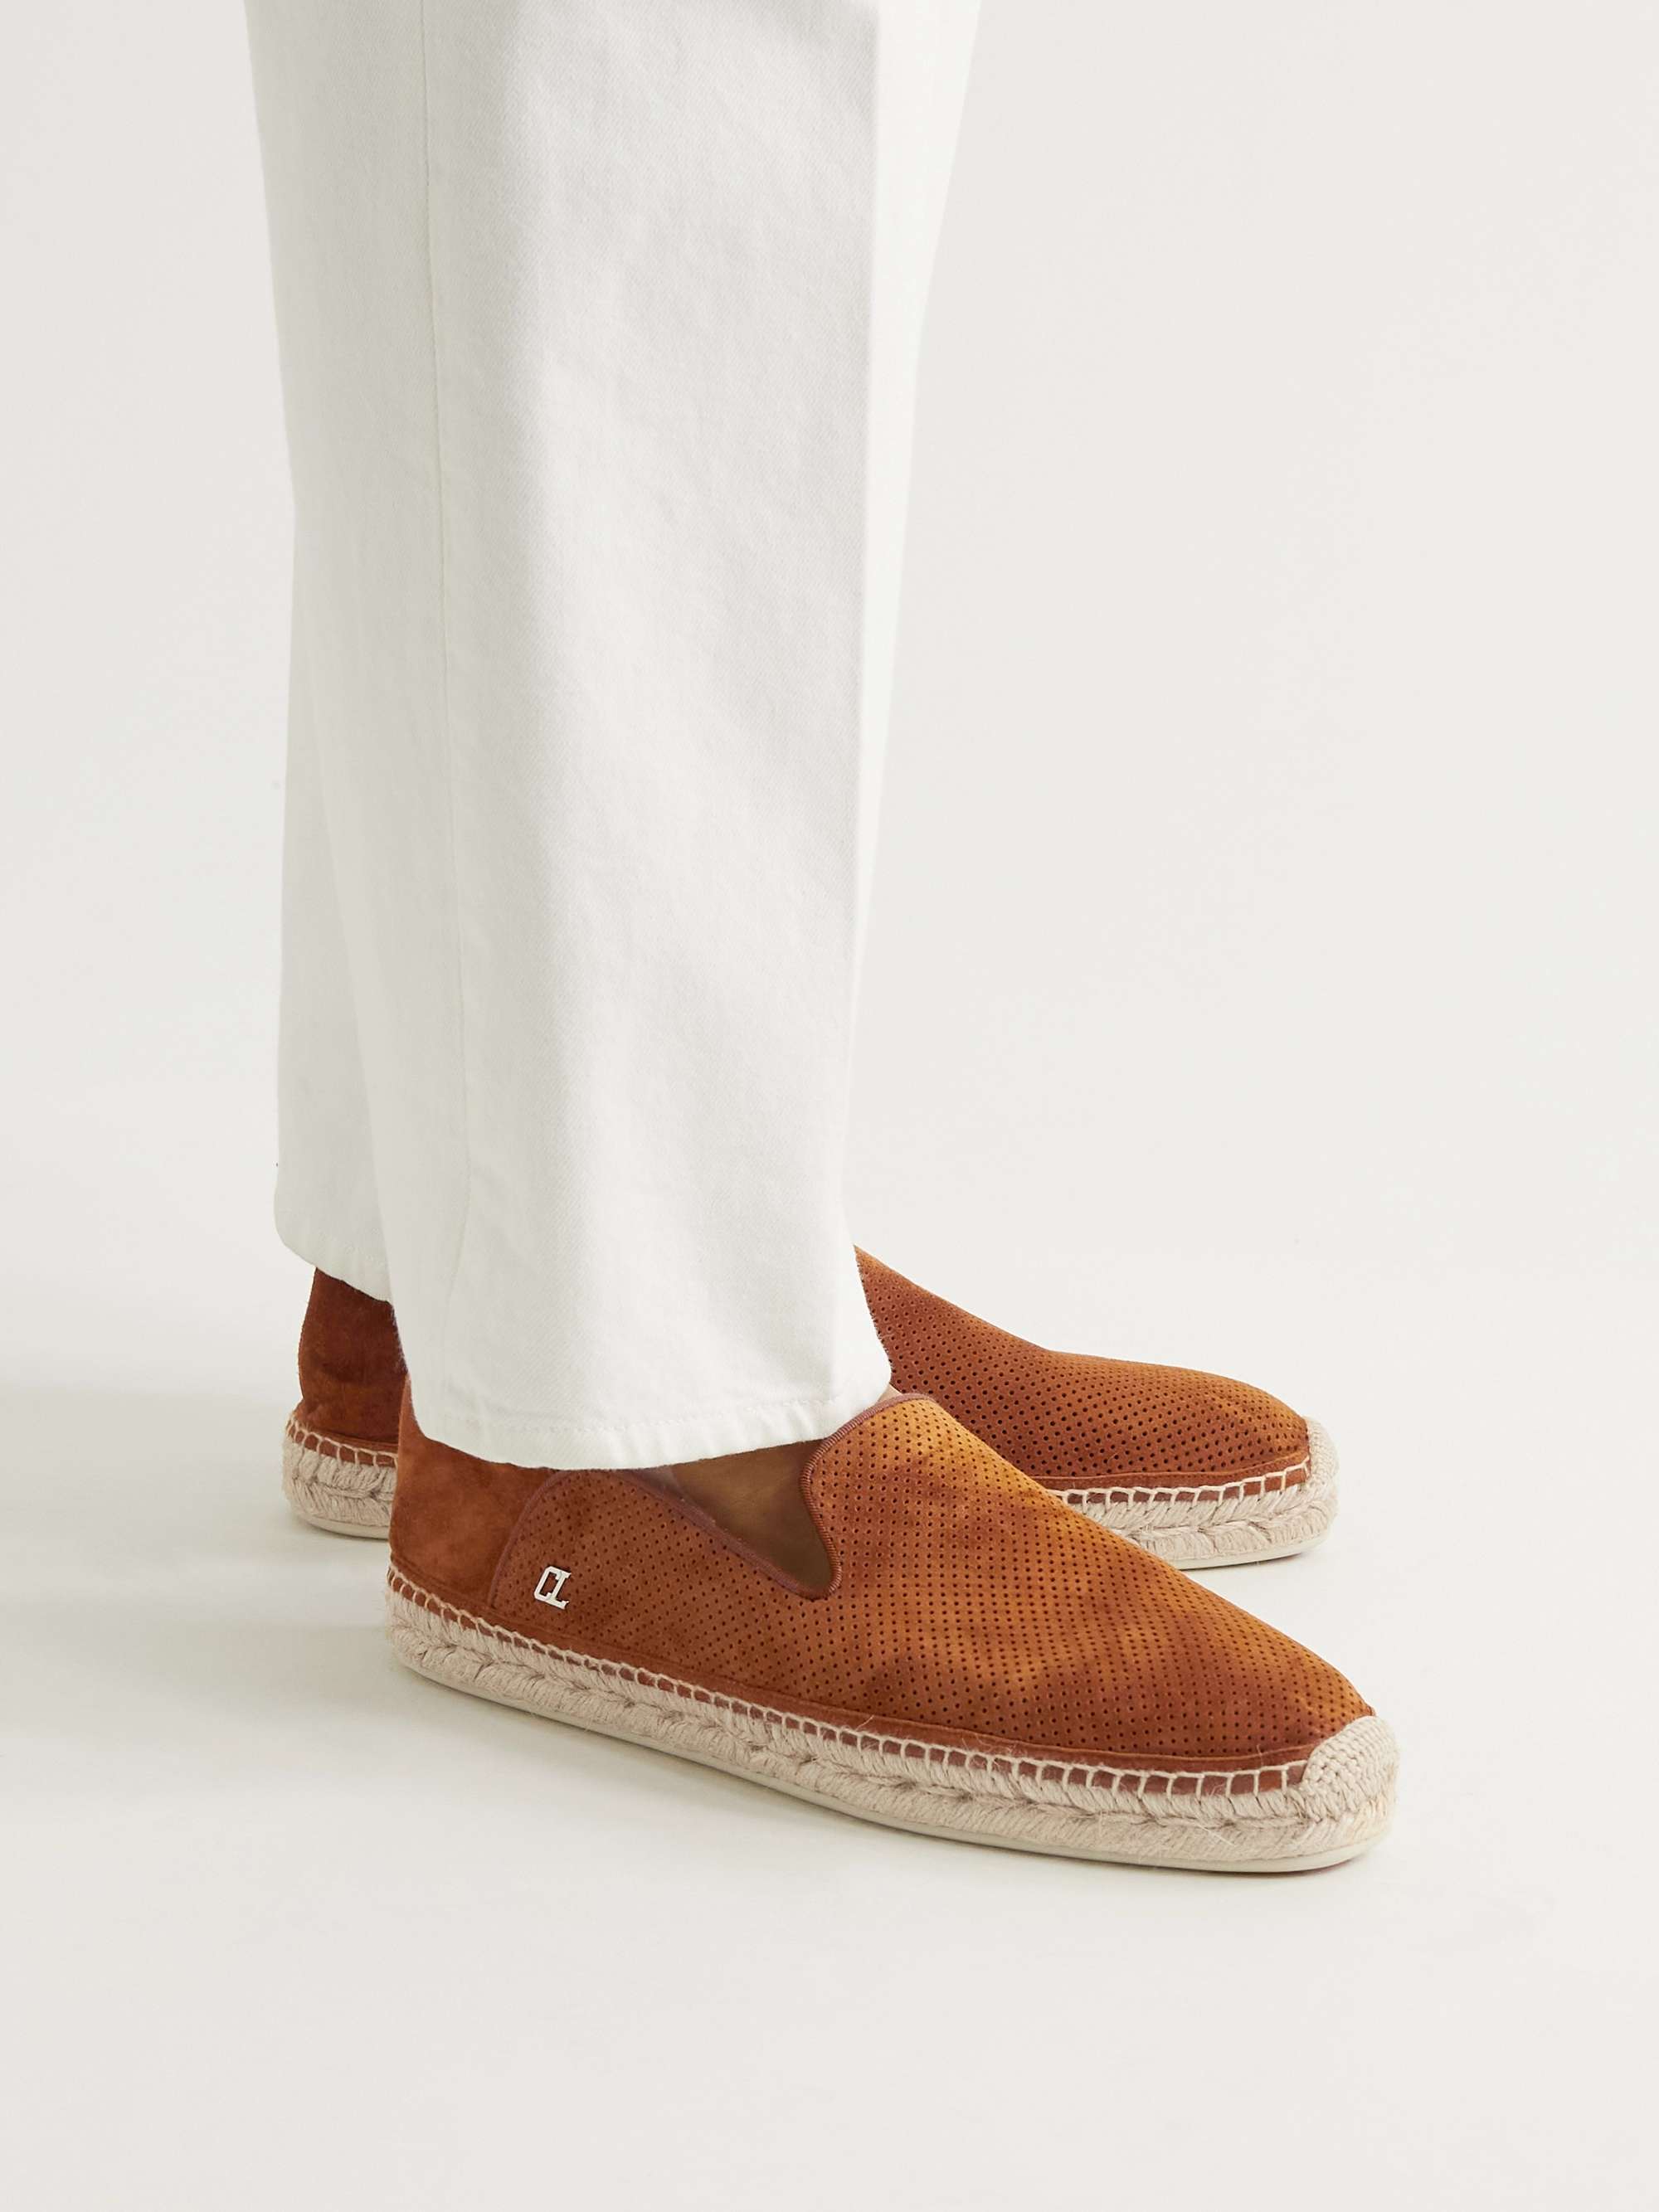 Brown Perforated Suede Espadrilles | CHRISTIAN MR PORTER